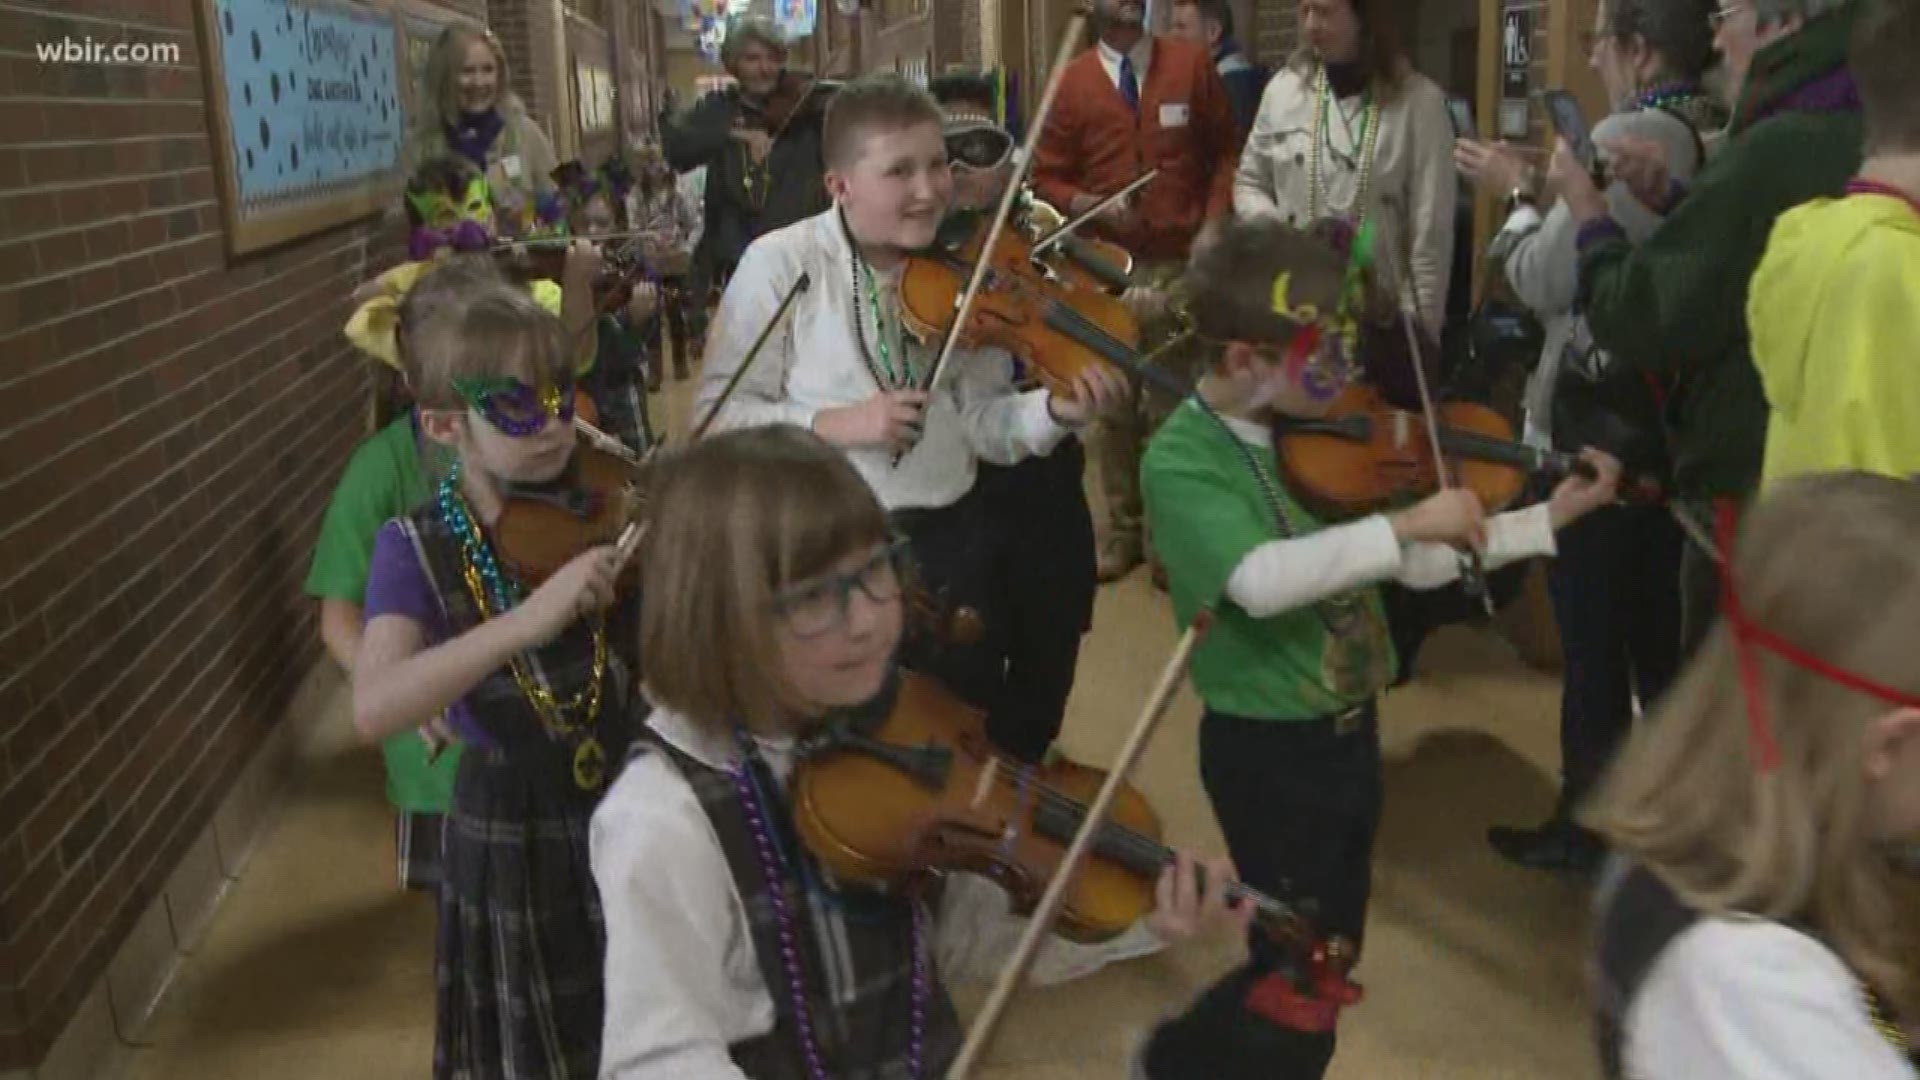 Students at Sacred Heart School had an orchestra marching through the school playing "When the Saints Go Marching In" on Mardi Gras. March 5, 2019-4pm